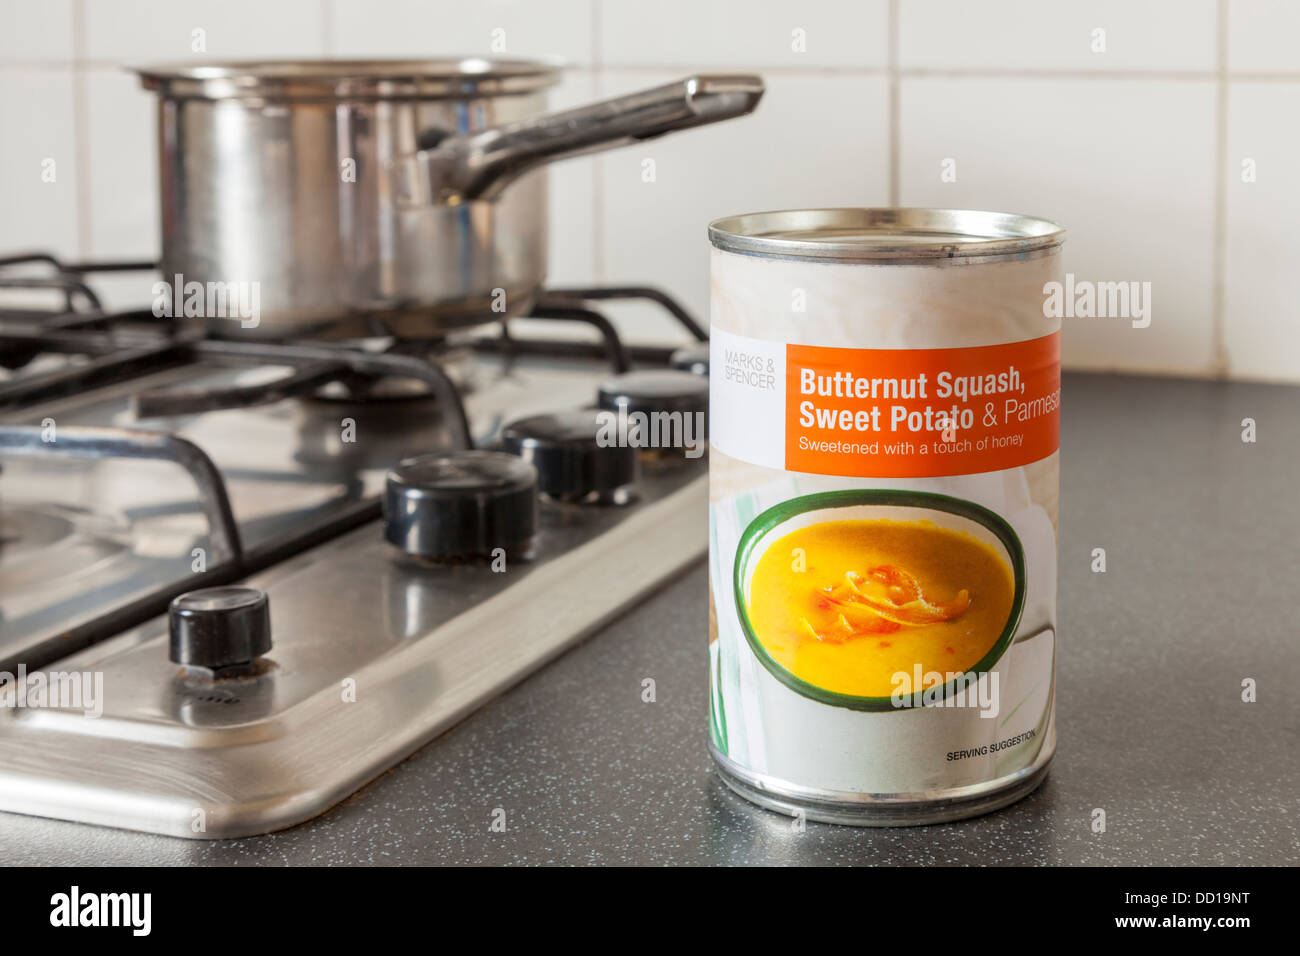 Tinned food. Marks & Spencer own label Butternut Squash, Sweet Potato and Parmesan soup in a tin Stock Photo